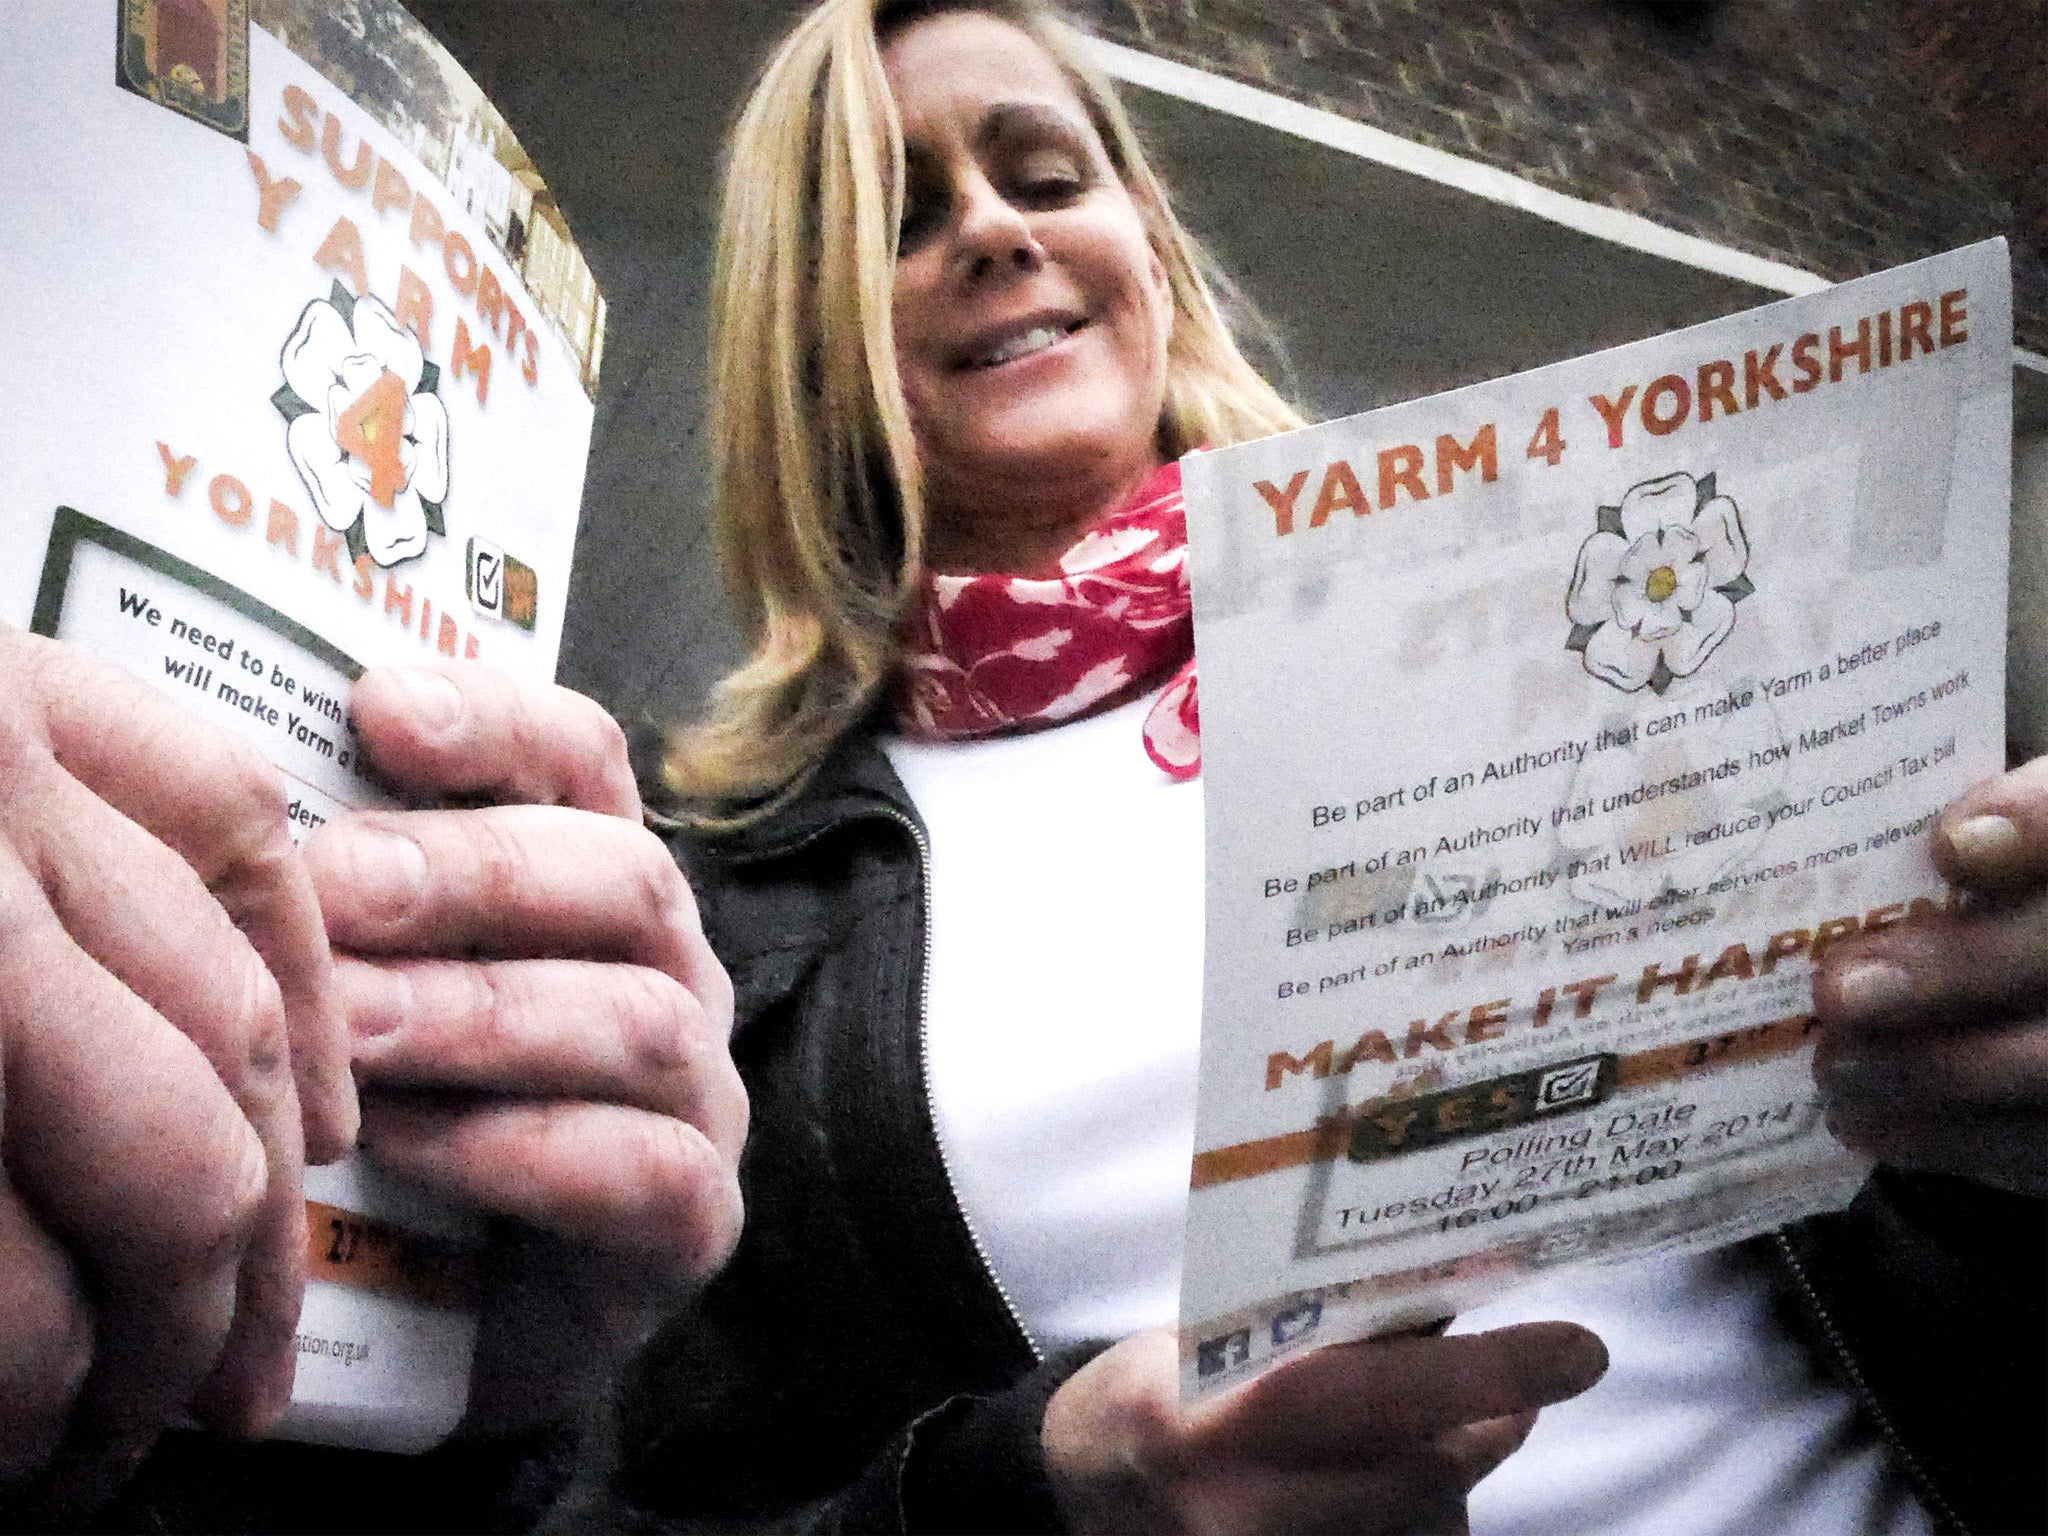 A local reads a Yarm for Yorkshire leaflet